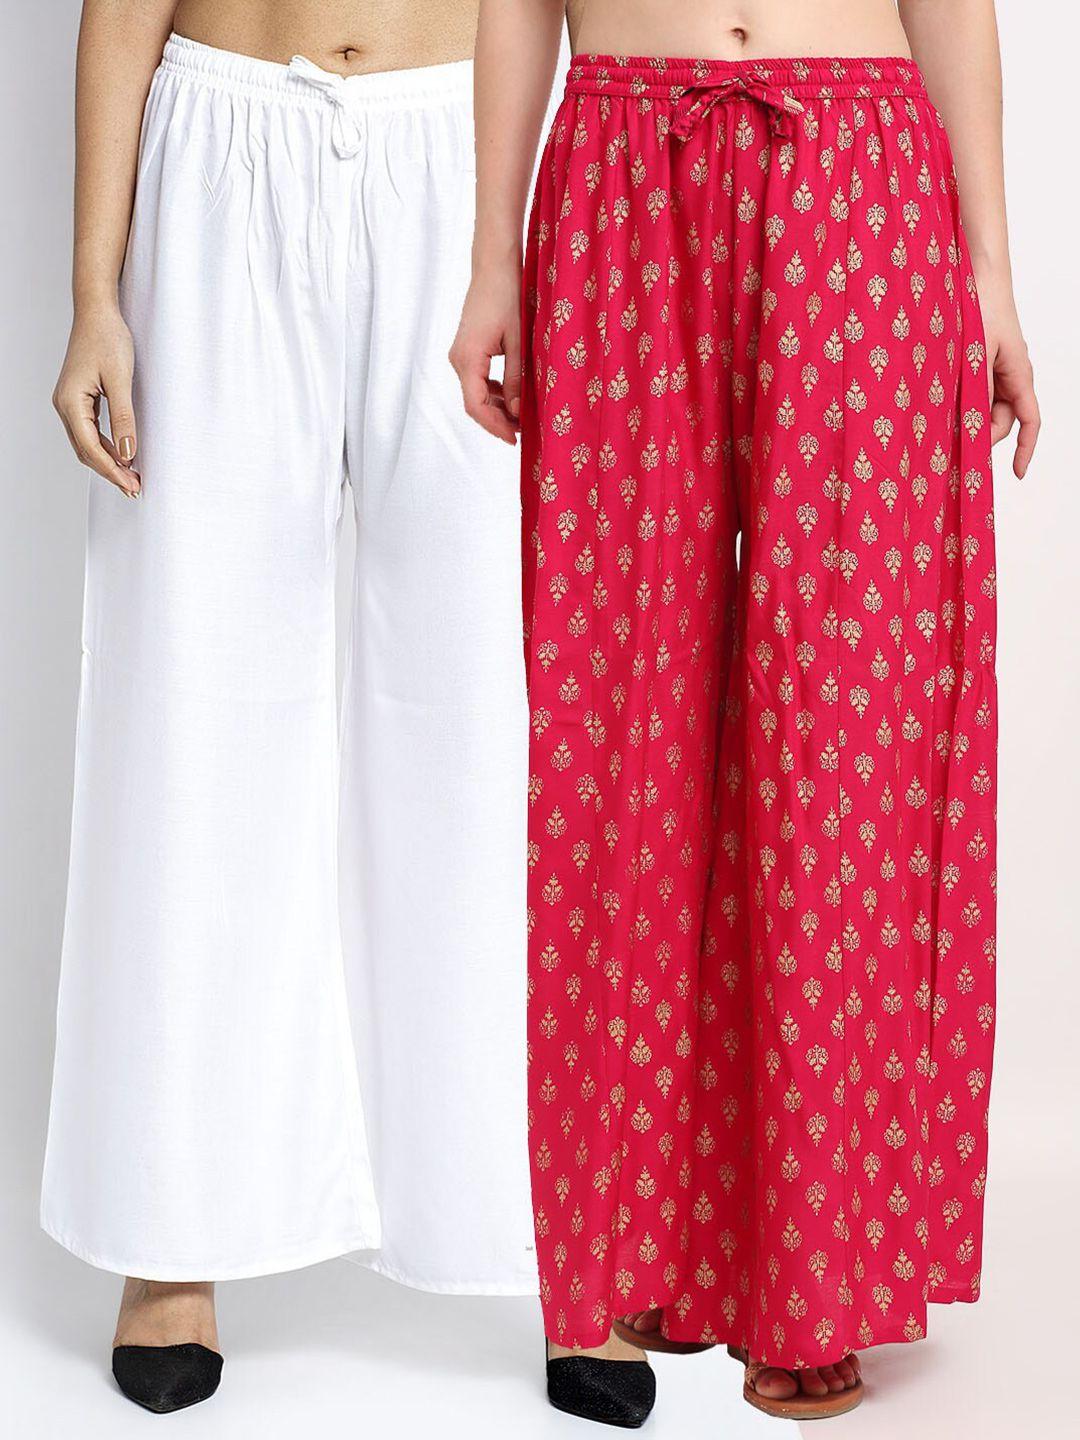 gracit women pack of 2 white & red ethnic palazzos